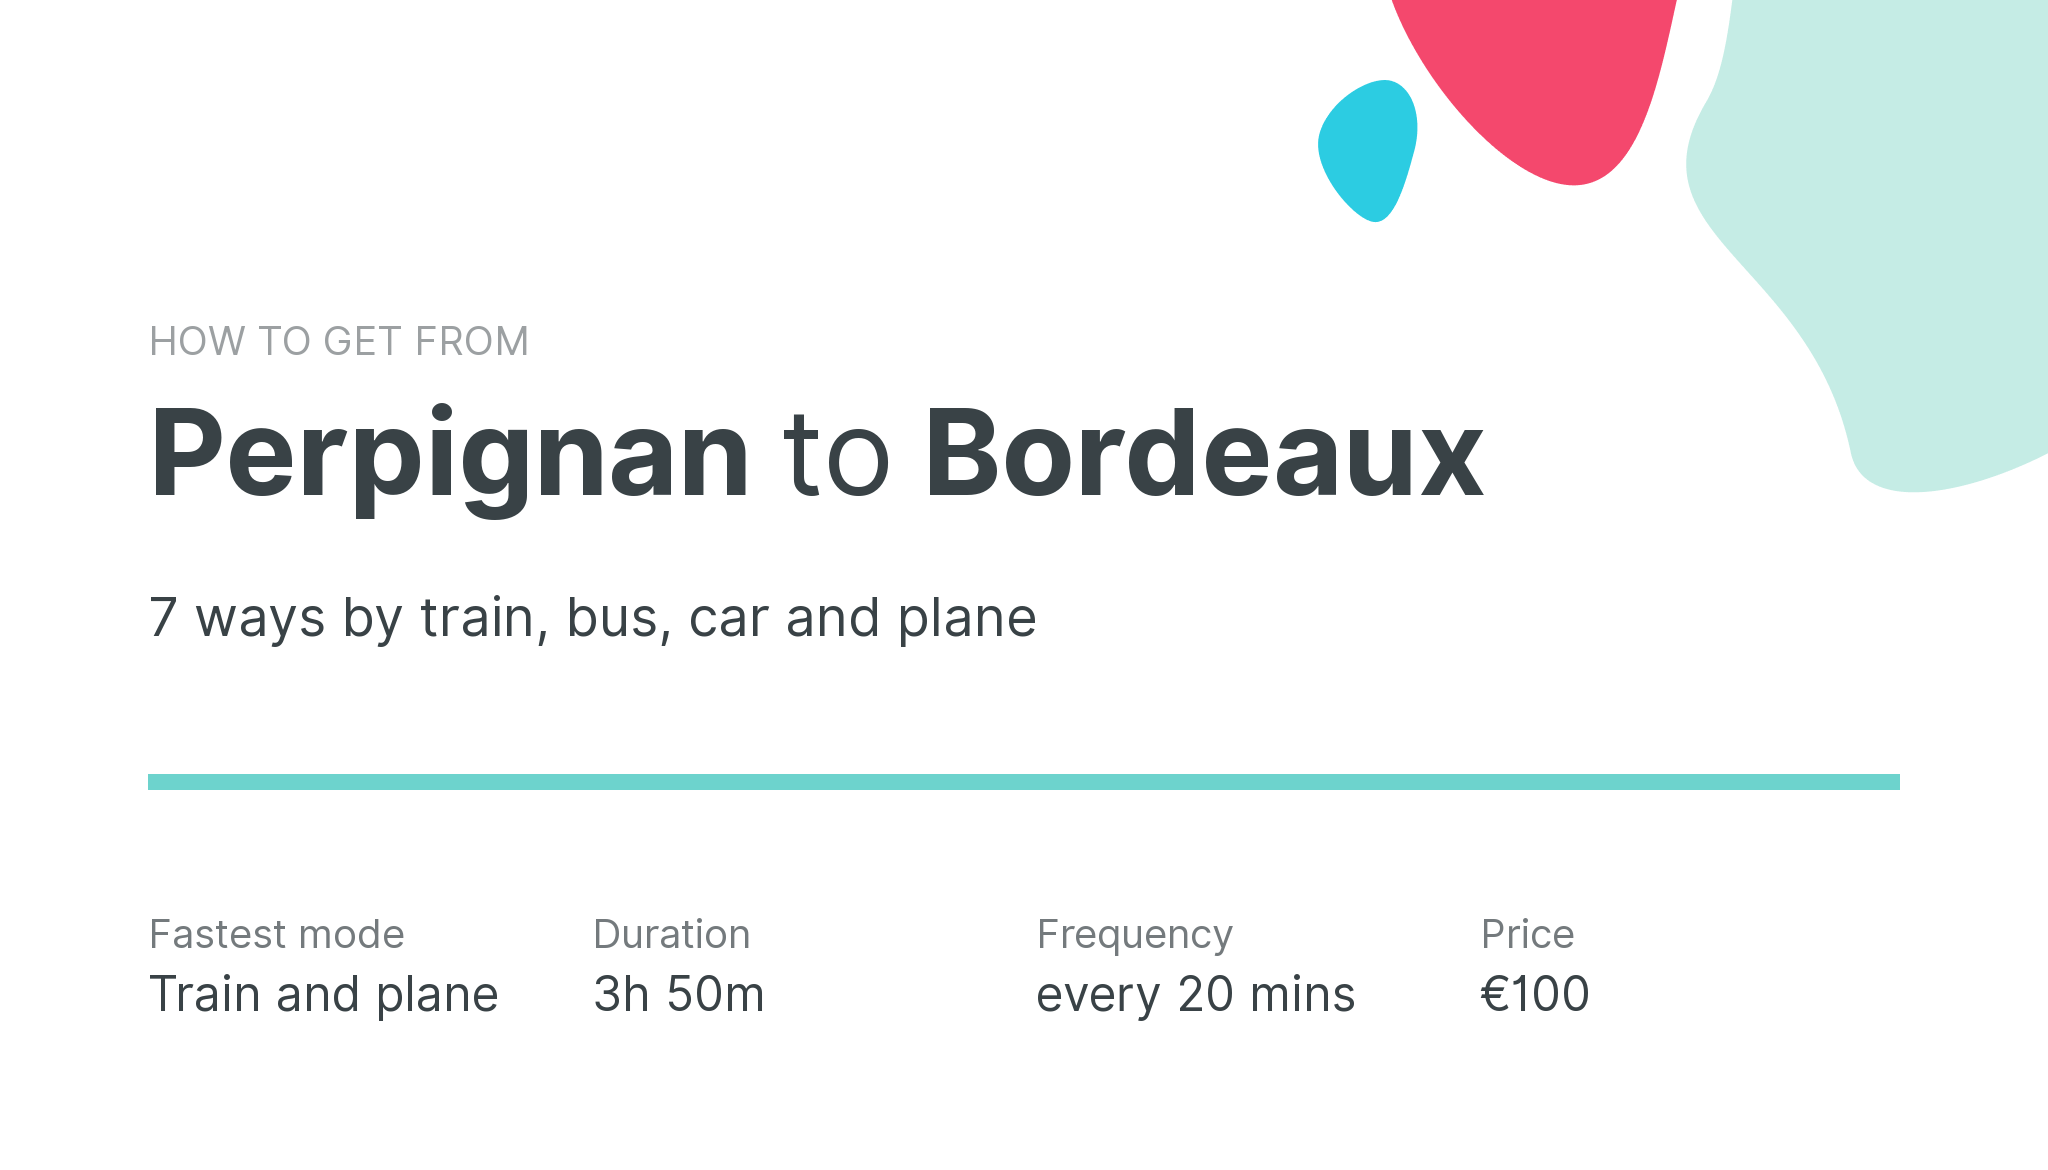 How do I get from Perpignan to Bordeaux